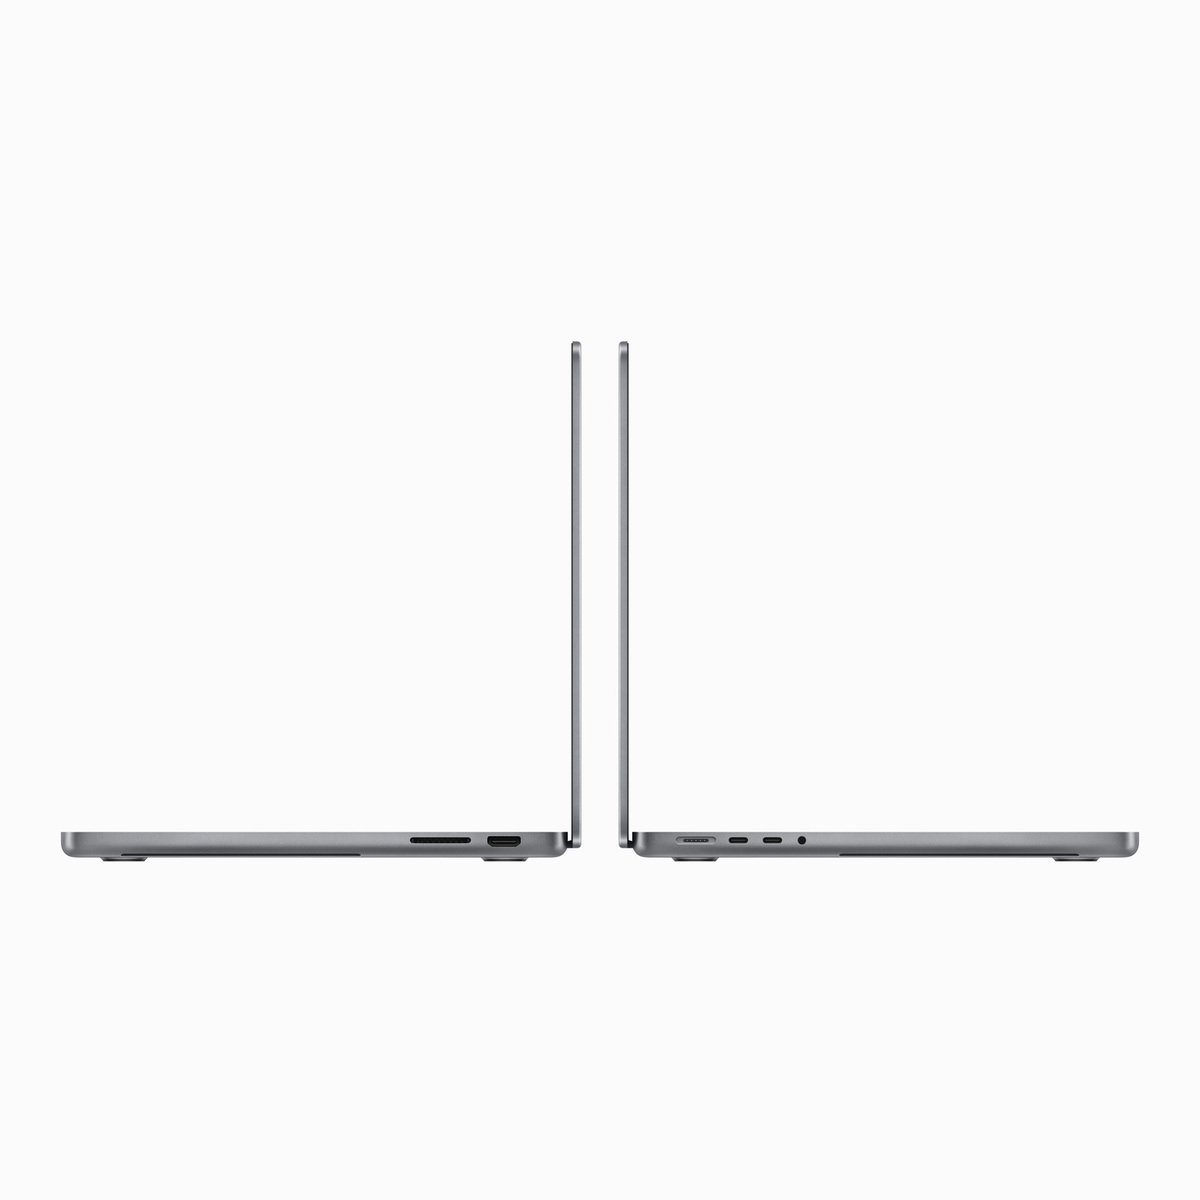 Apple MacBook Pro M3 Chip, 14 inches, 8 GB RAM, 1 TB Storage, Space Gray, MTL83AB/A